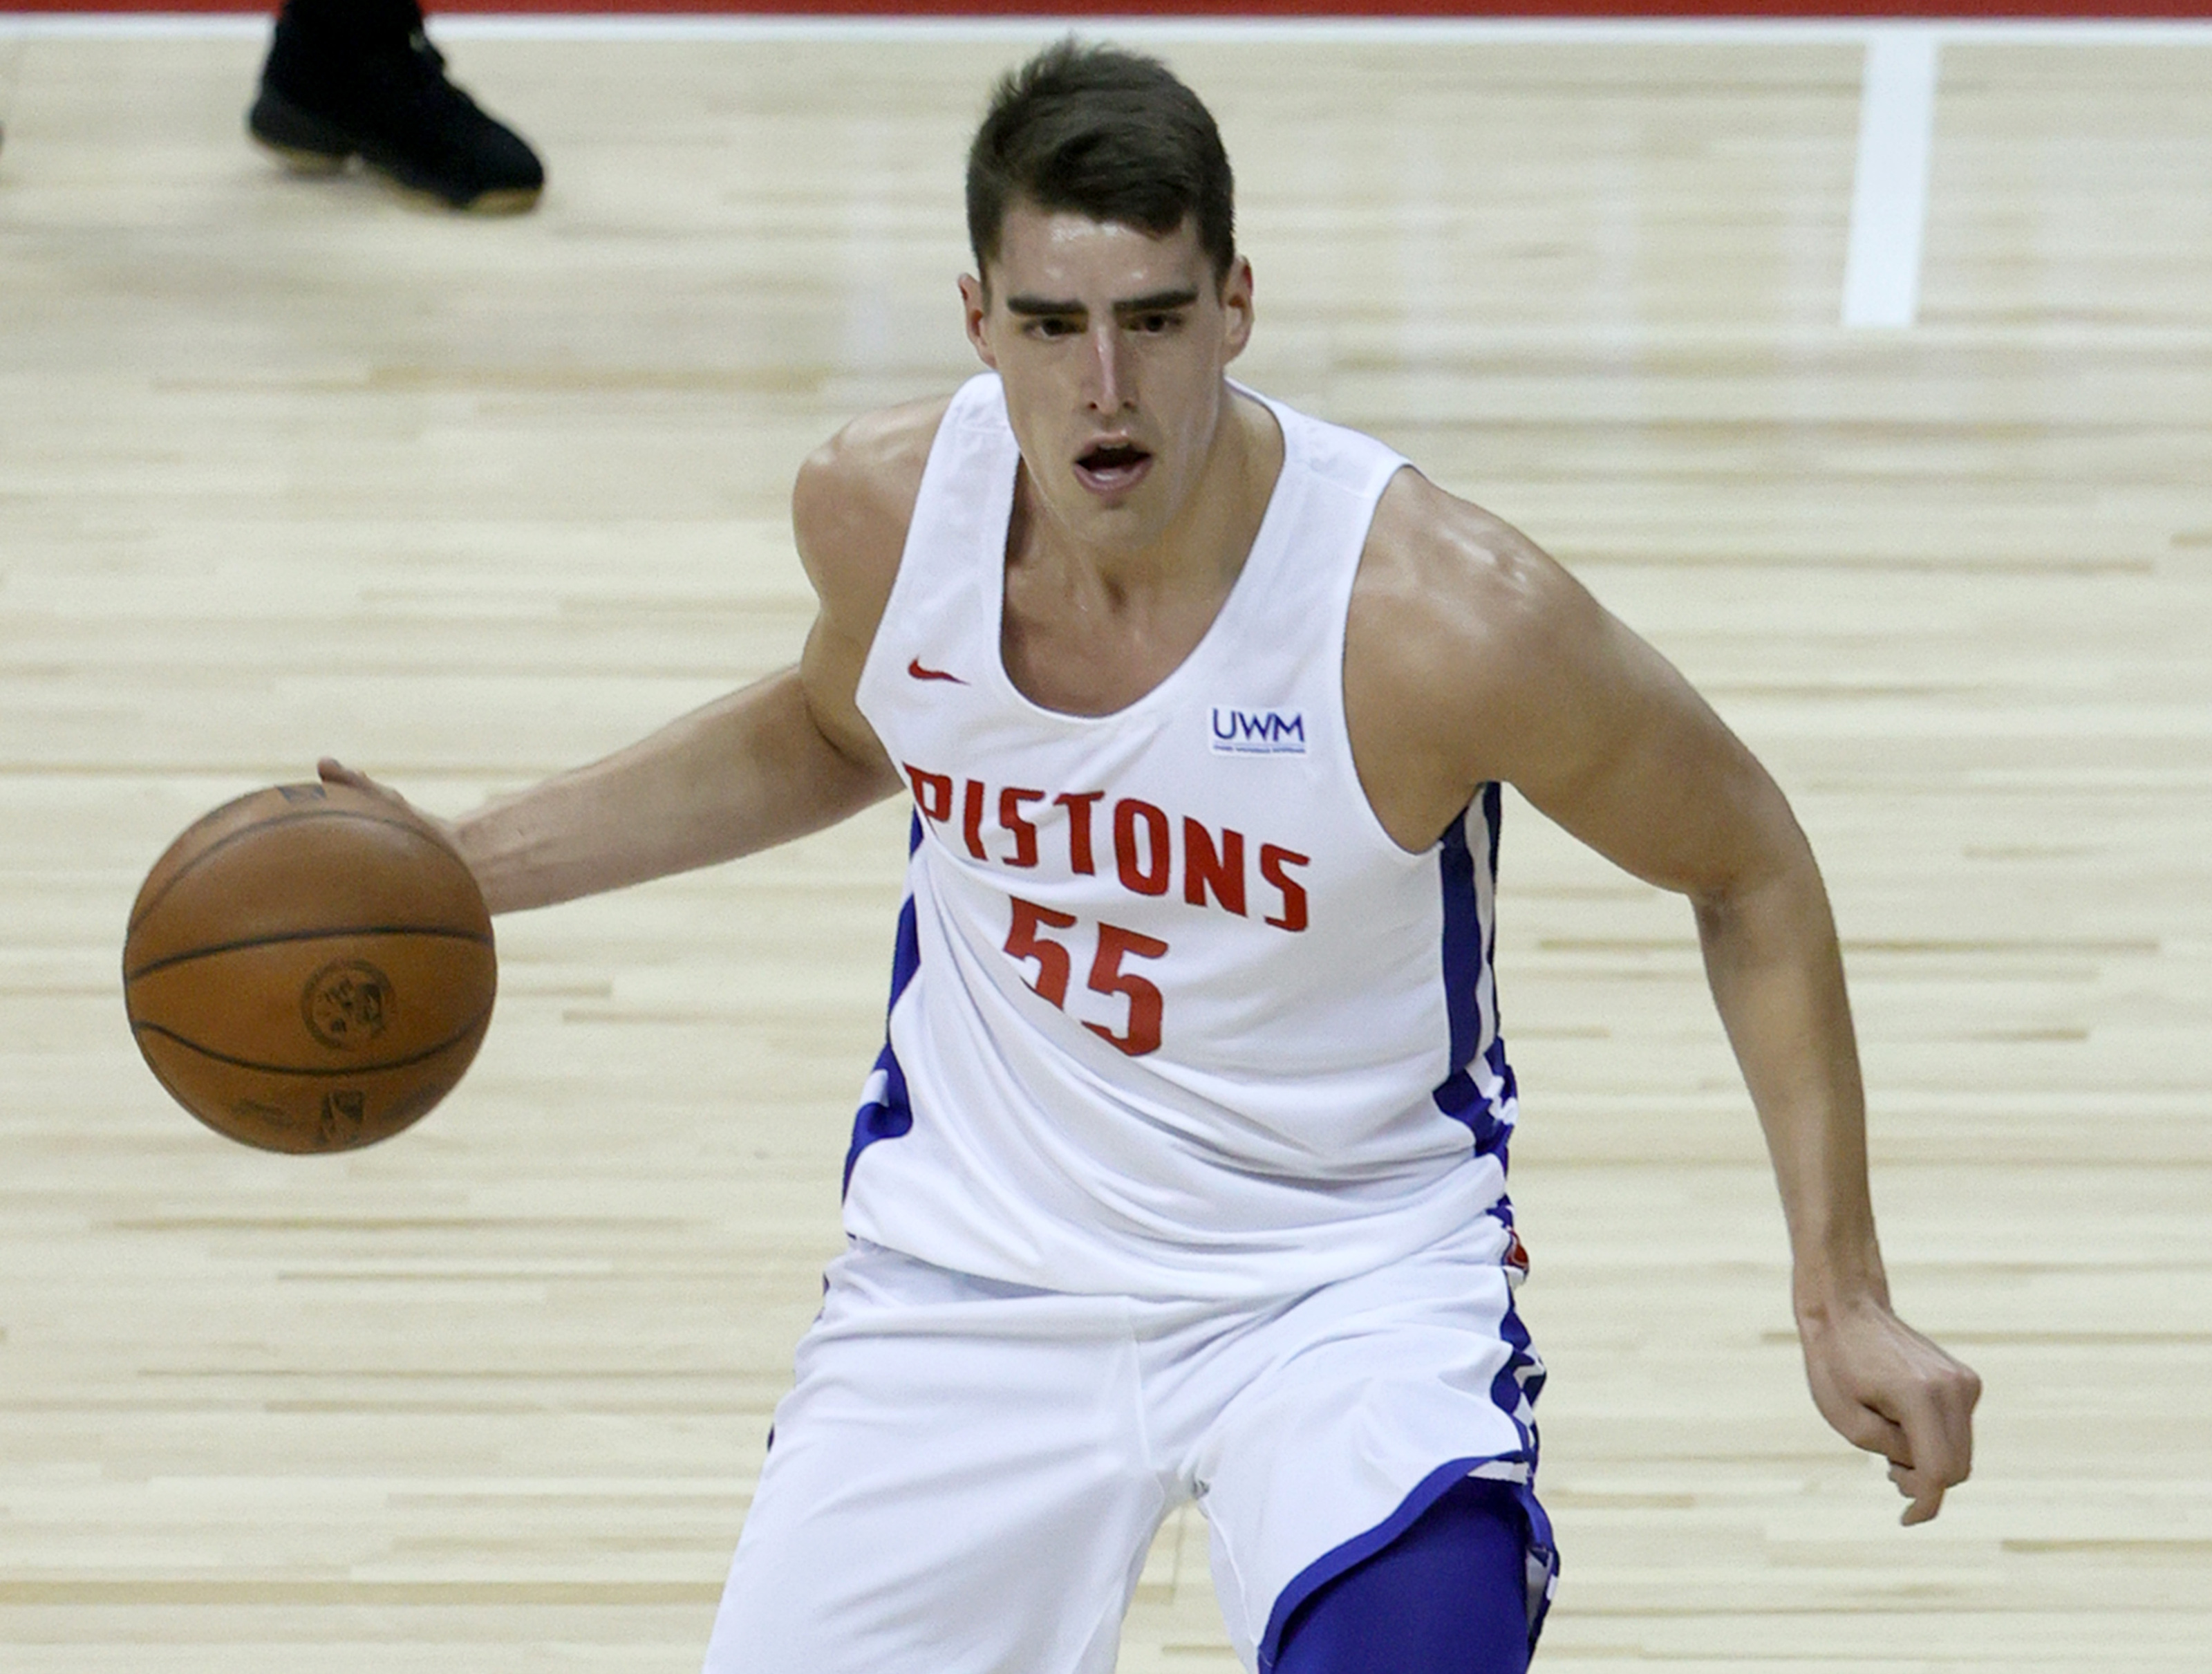 Pistons get a double dip of four-year Big Ten stars in Livers, Garza